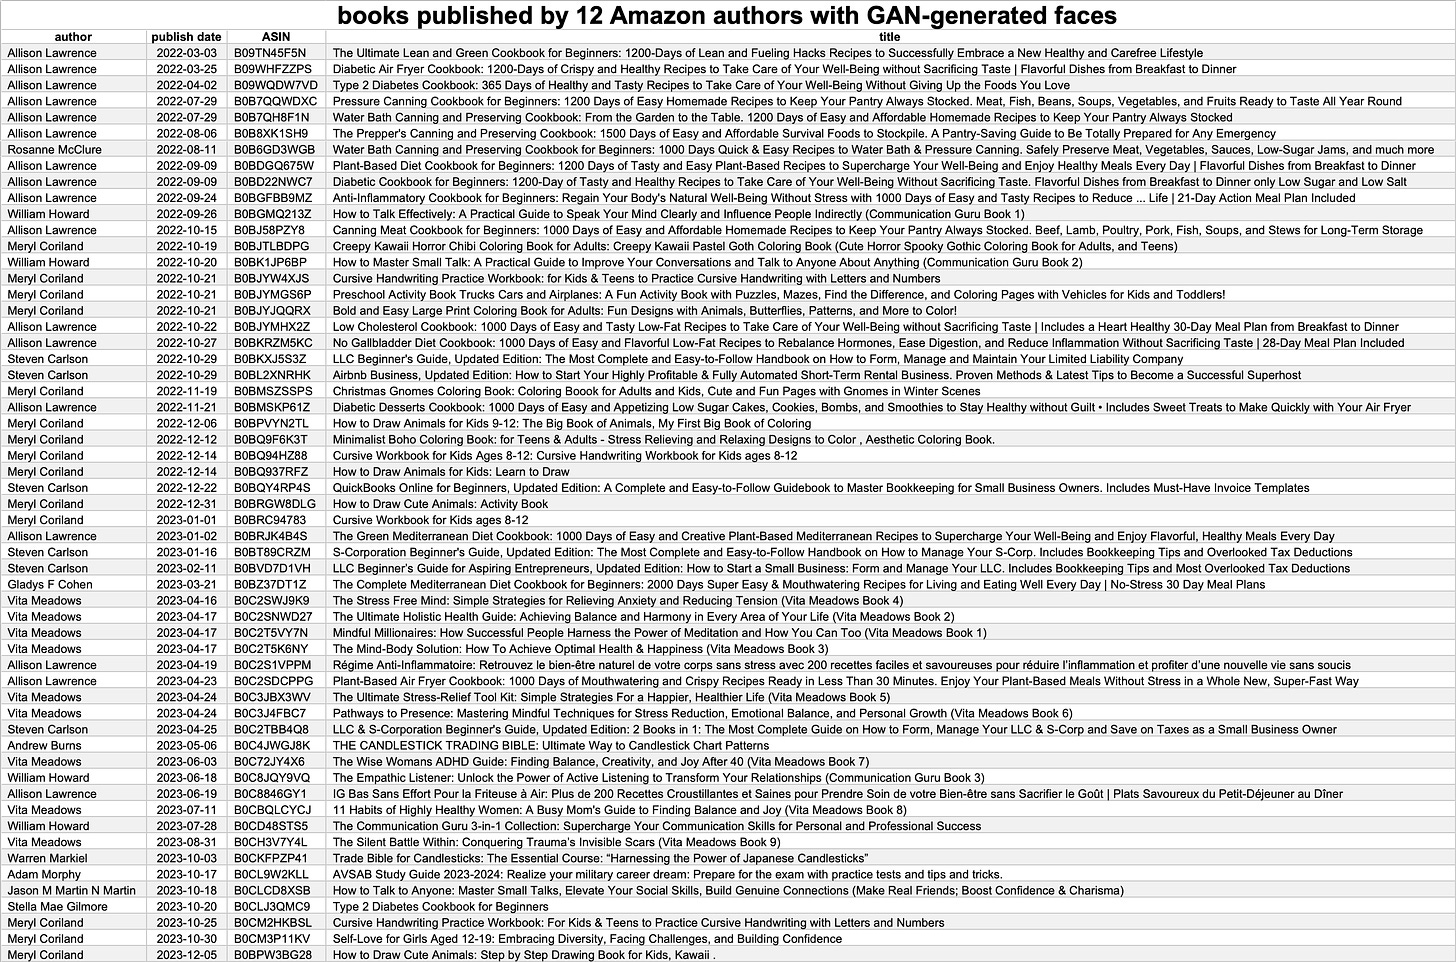 table of books published by the GAN-faced Amazon authors